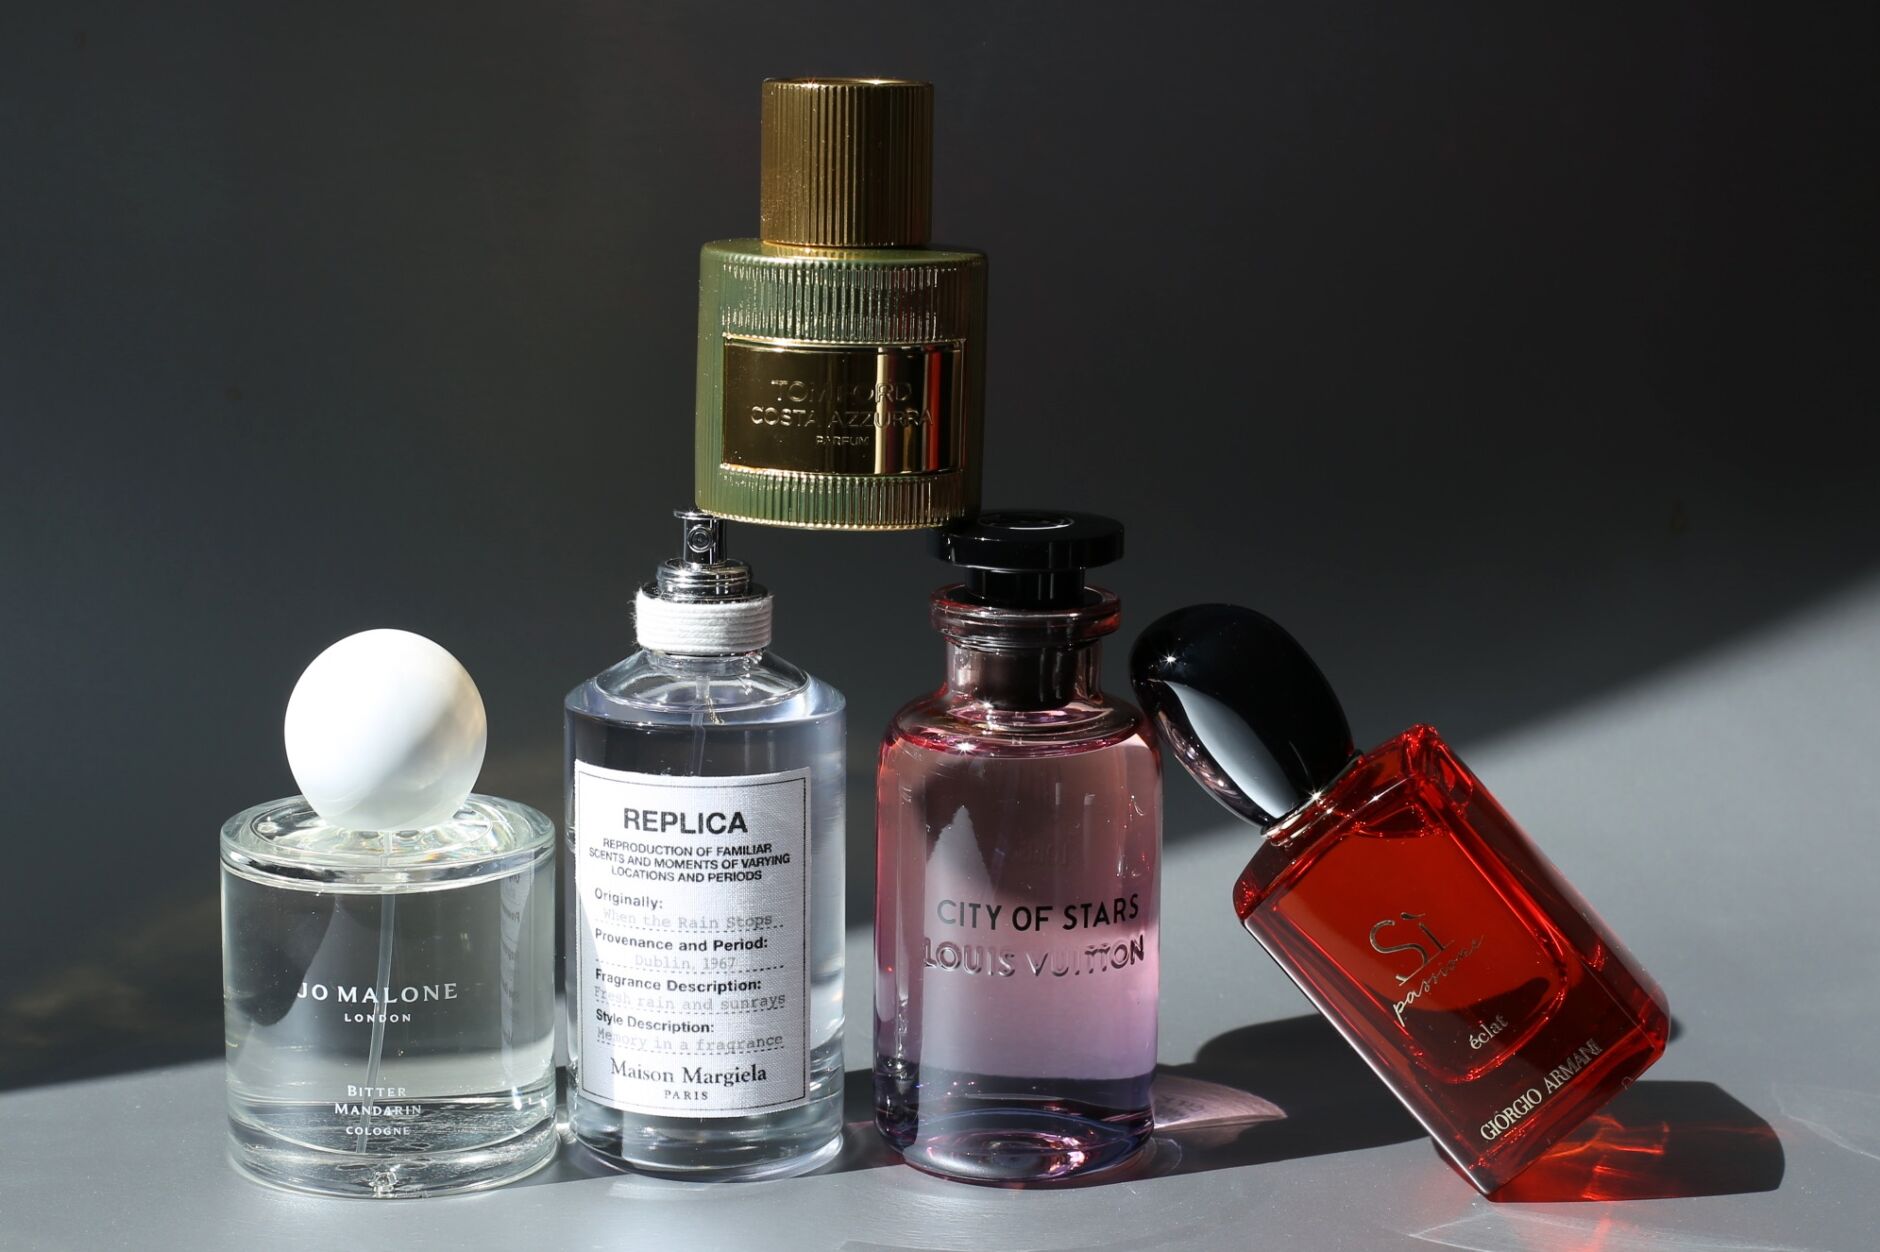 PUT SPRING ON YOUR SKIN: TOP 5 NEW FRAGRANCES TO ADD TO YOUR PERFUME WARDROBE